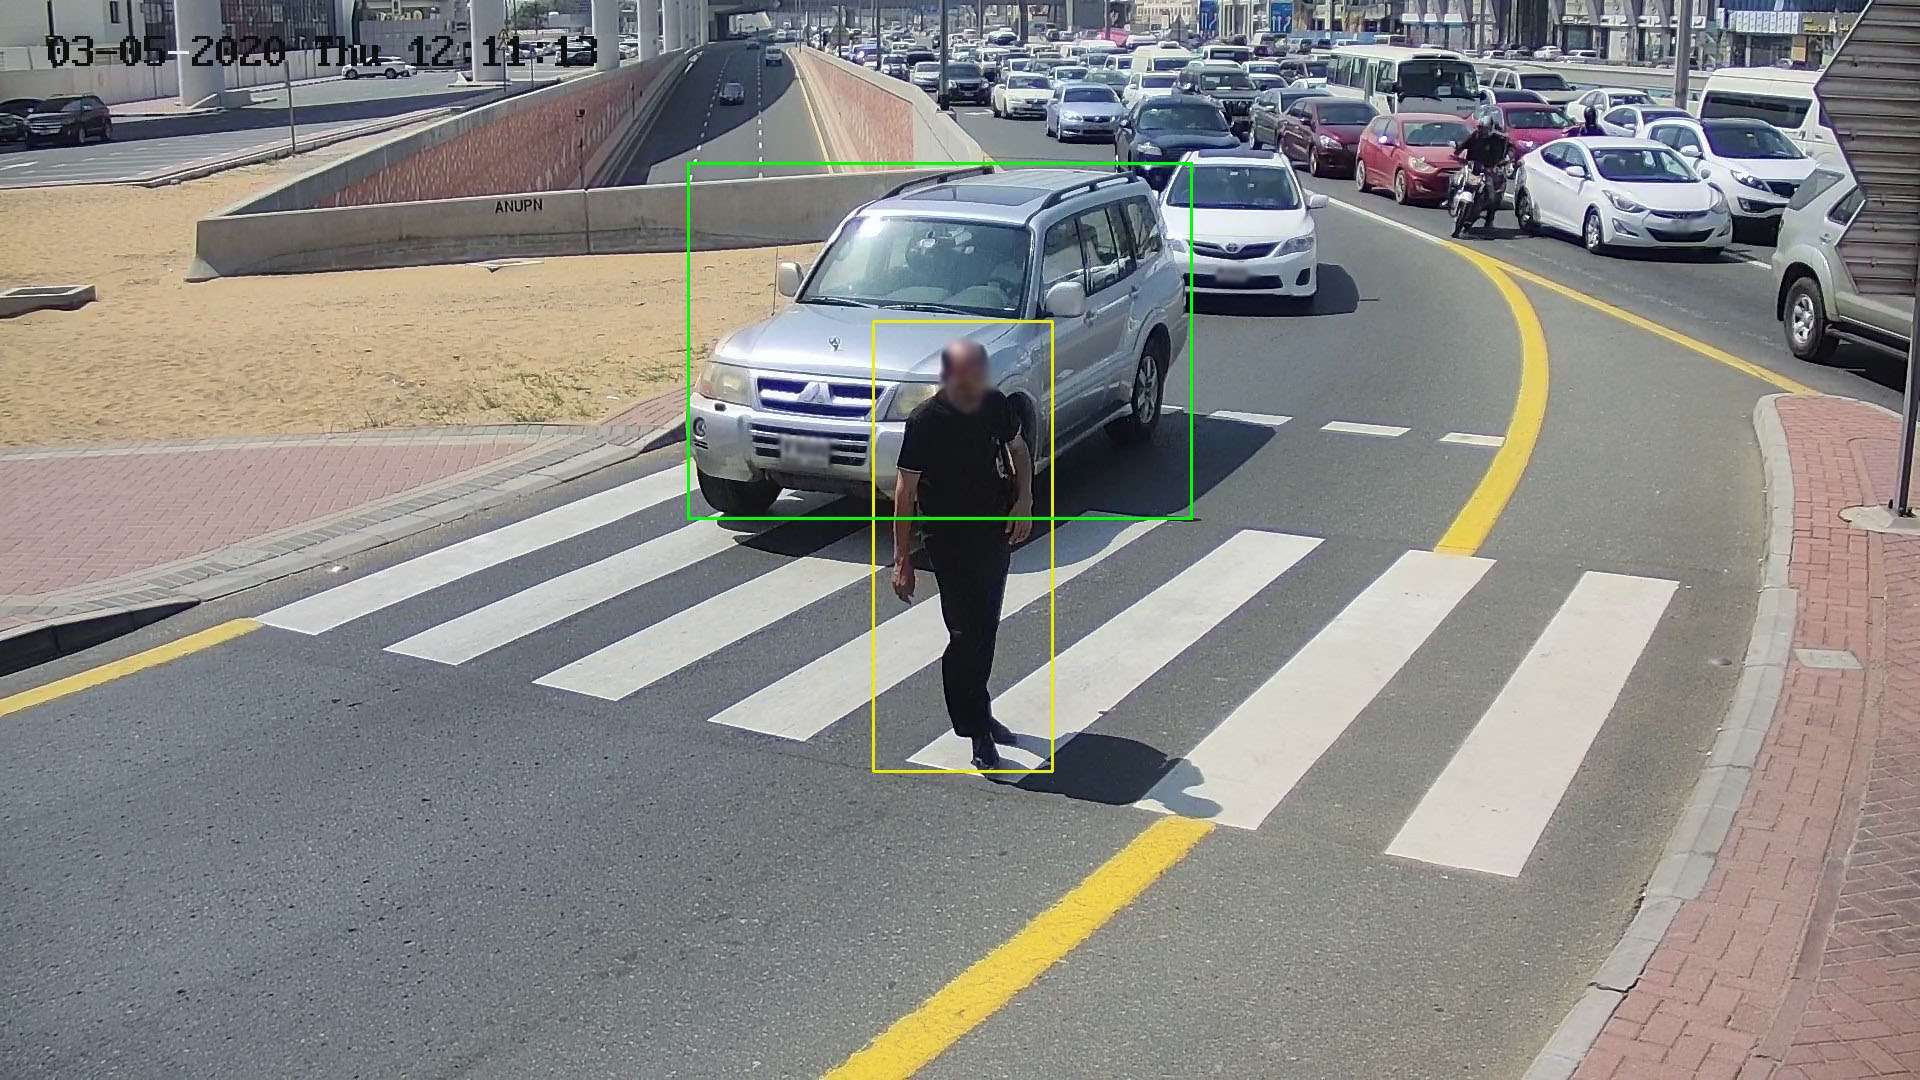 Pedestrian Crossing Violation on Four Lines